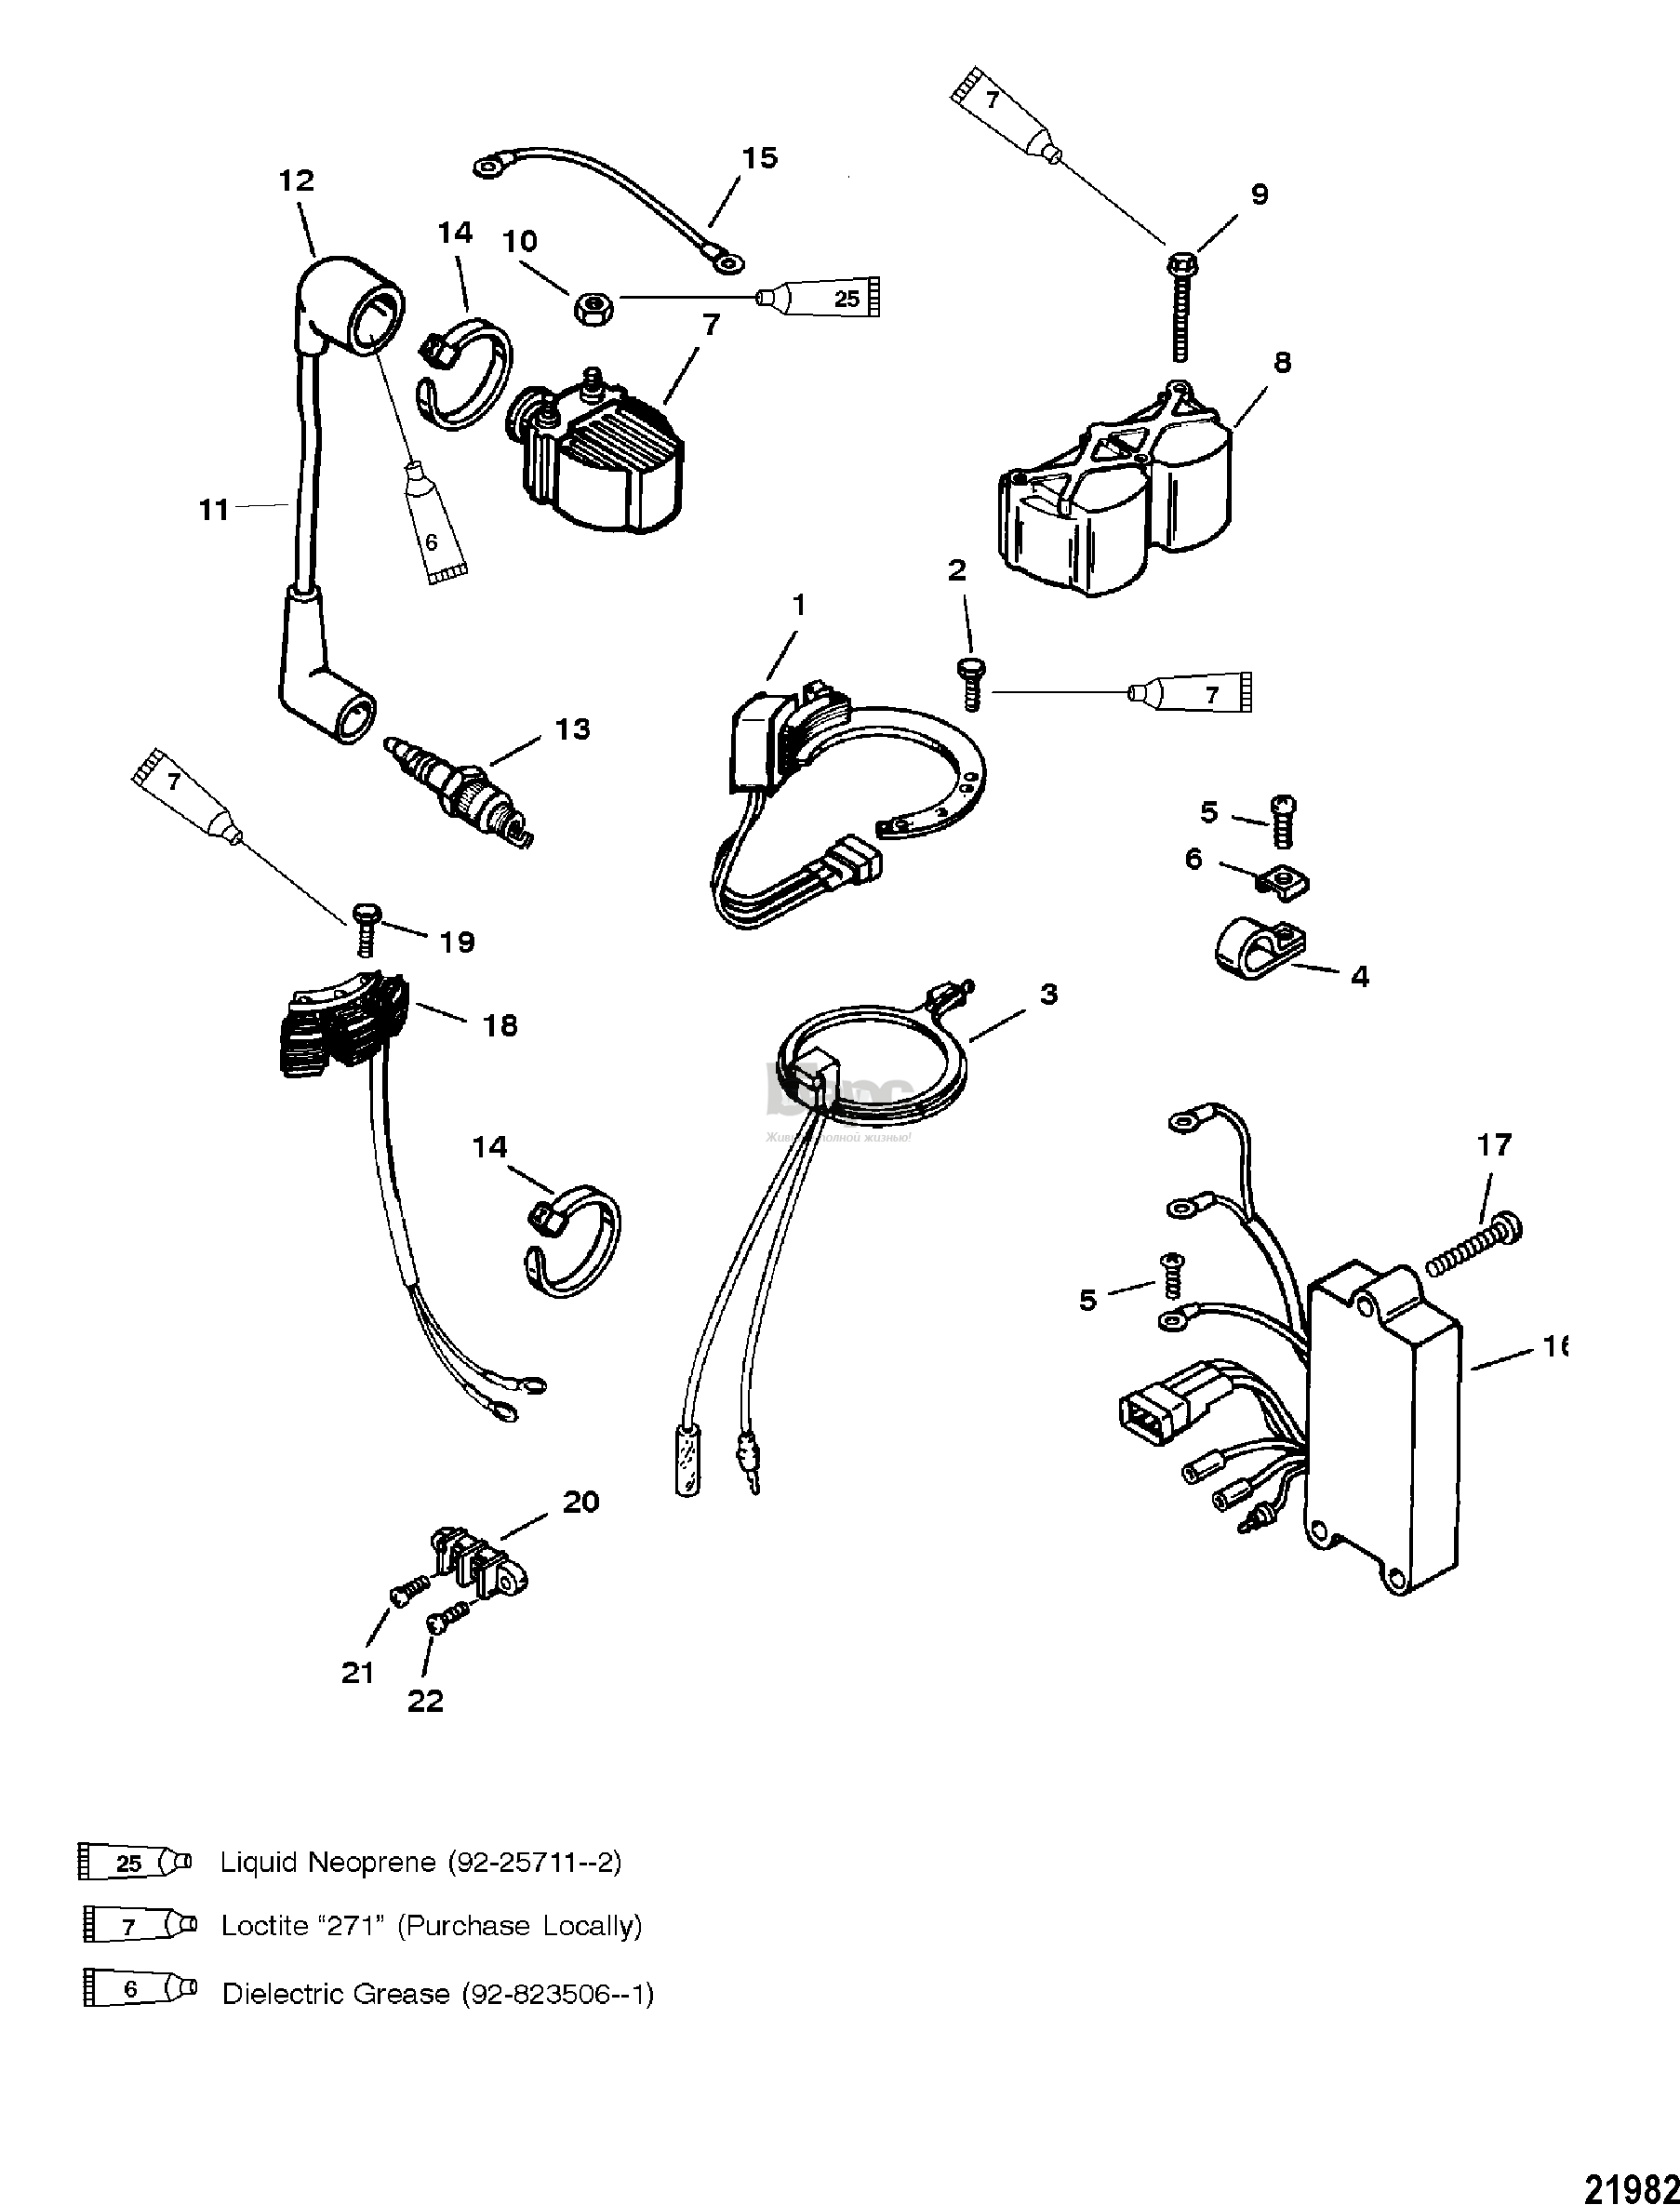 Ignition/Electrical Components